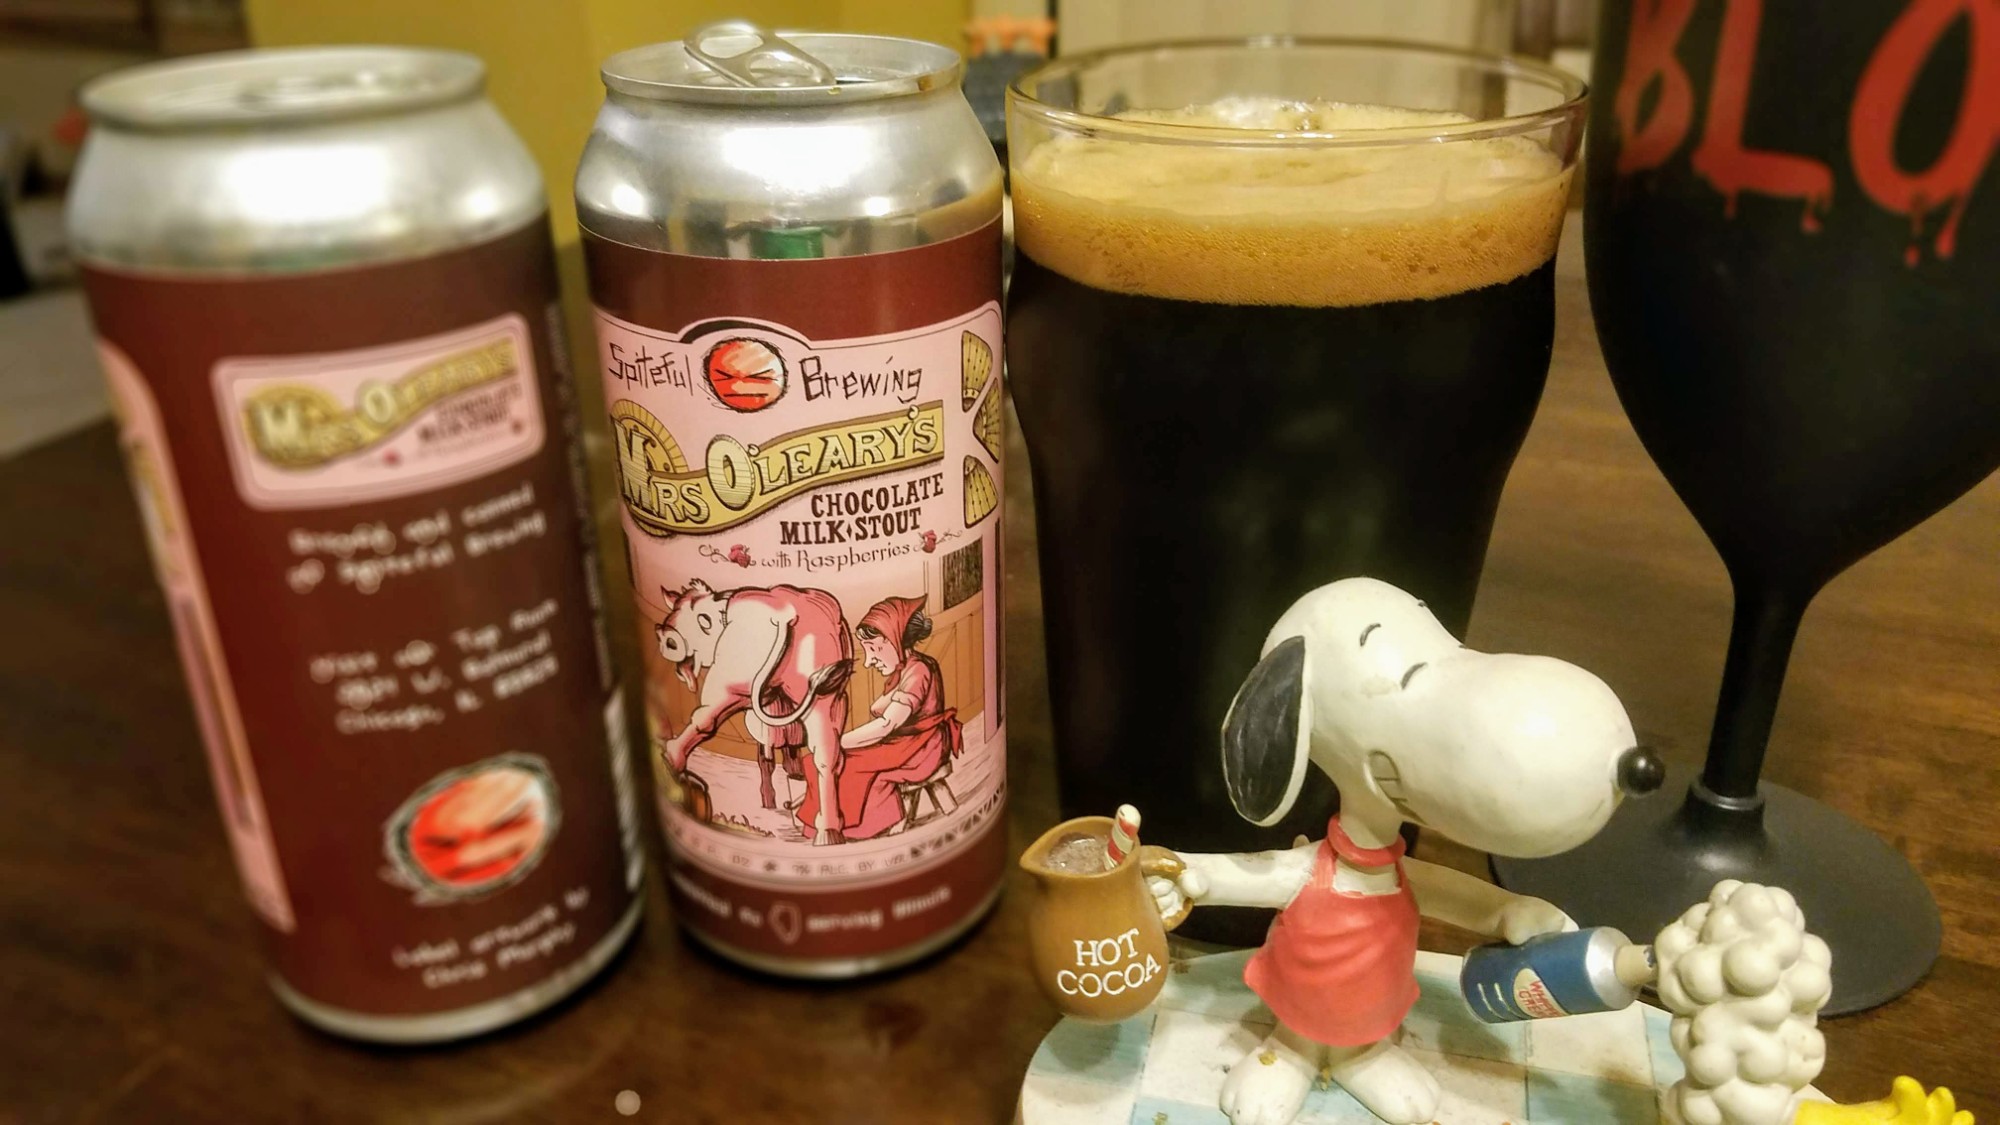 Mrs. O'Leary's Chocolate Stout